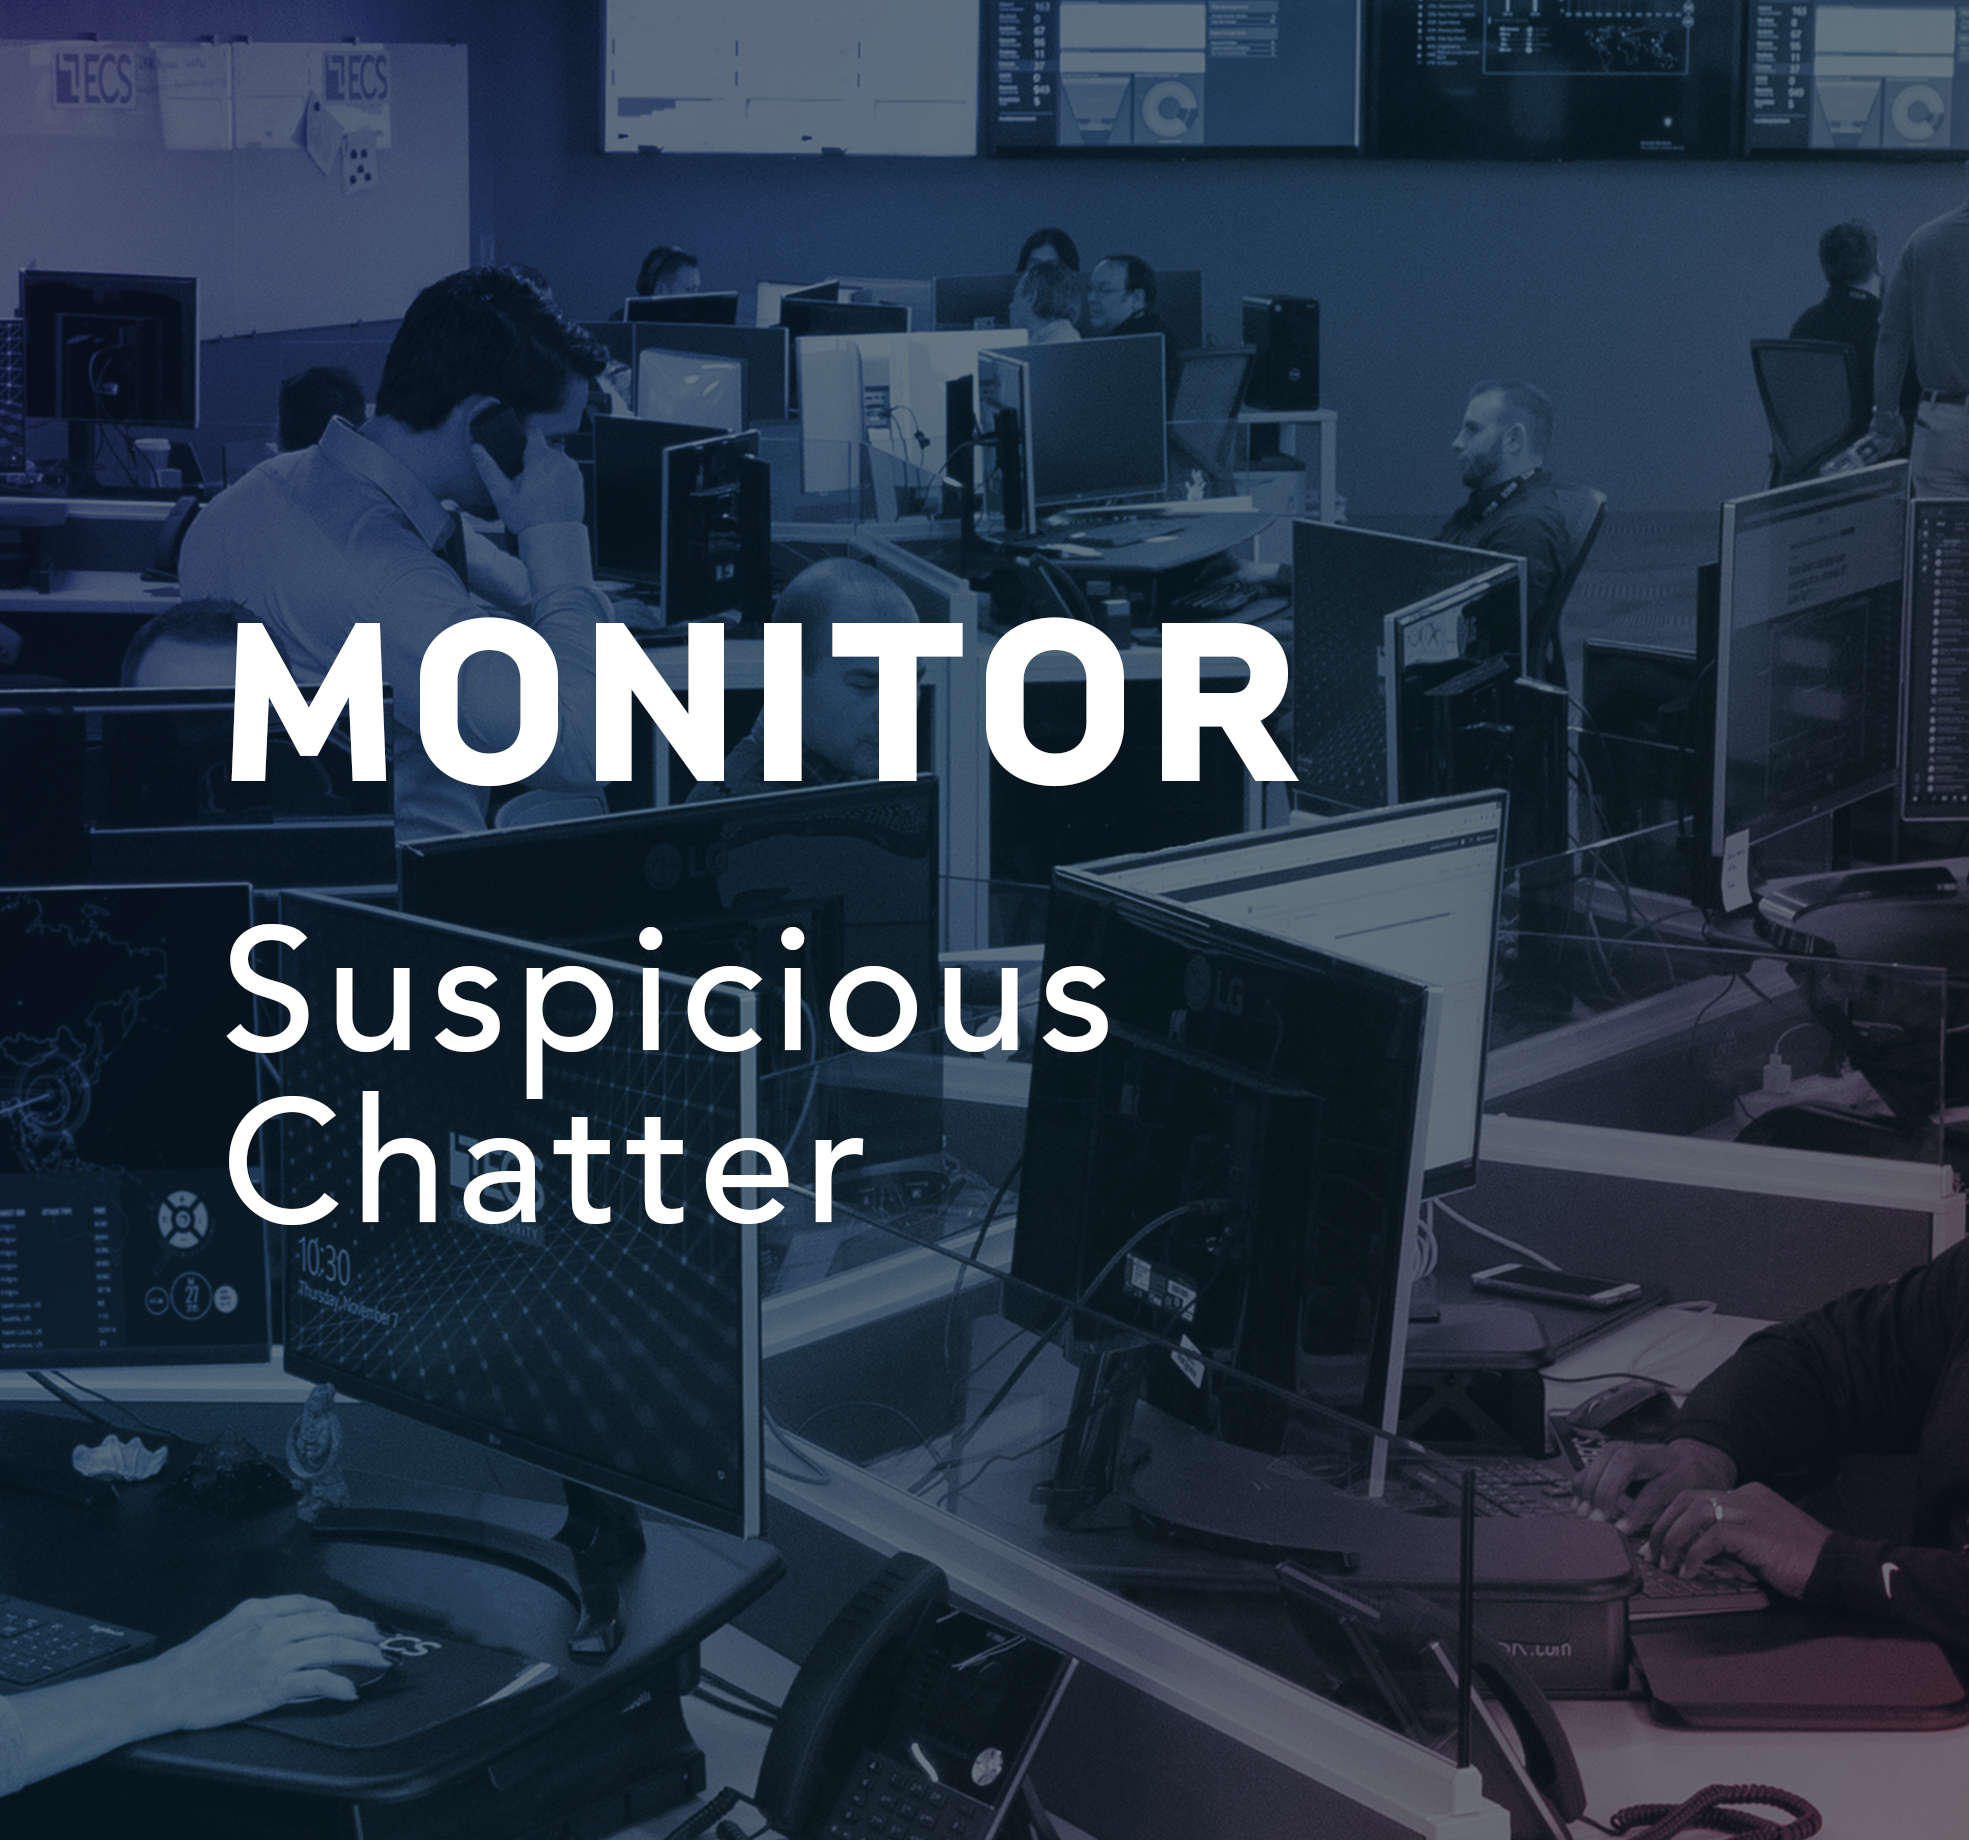 MONITOR Suspicious Chatter